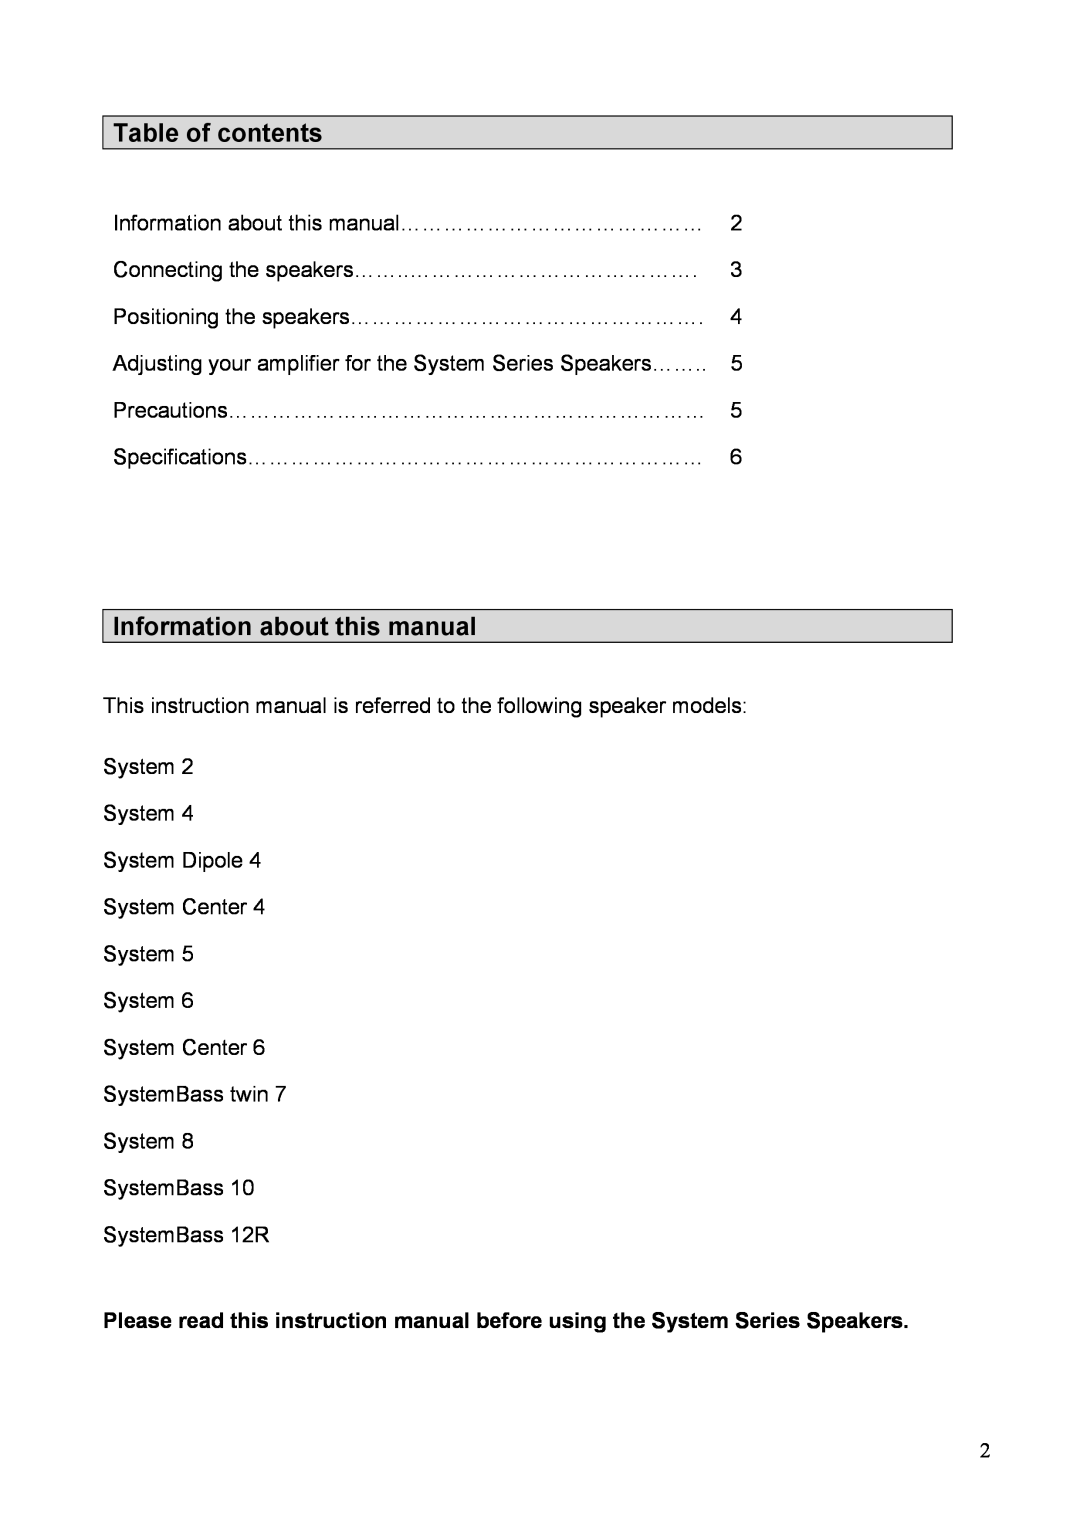 Crystal Audiovideo System Series operating instructions Table of contents, Information about this manual 